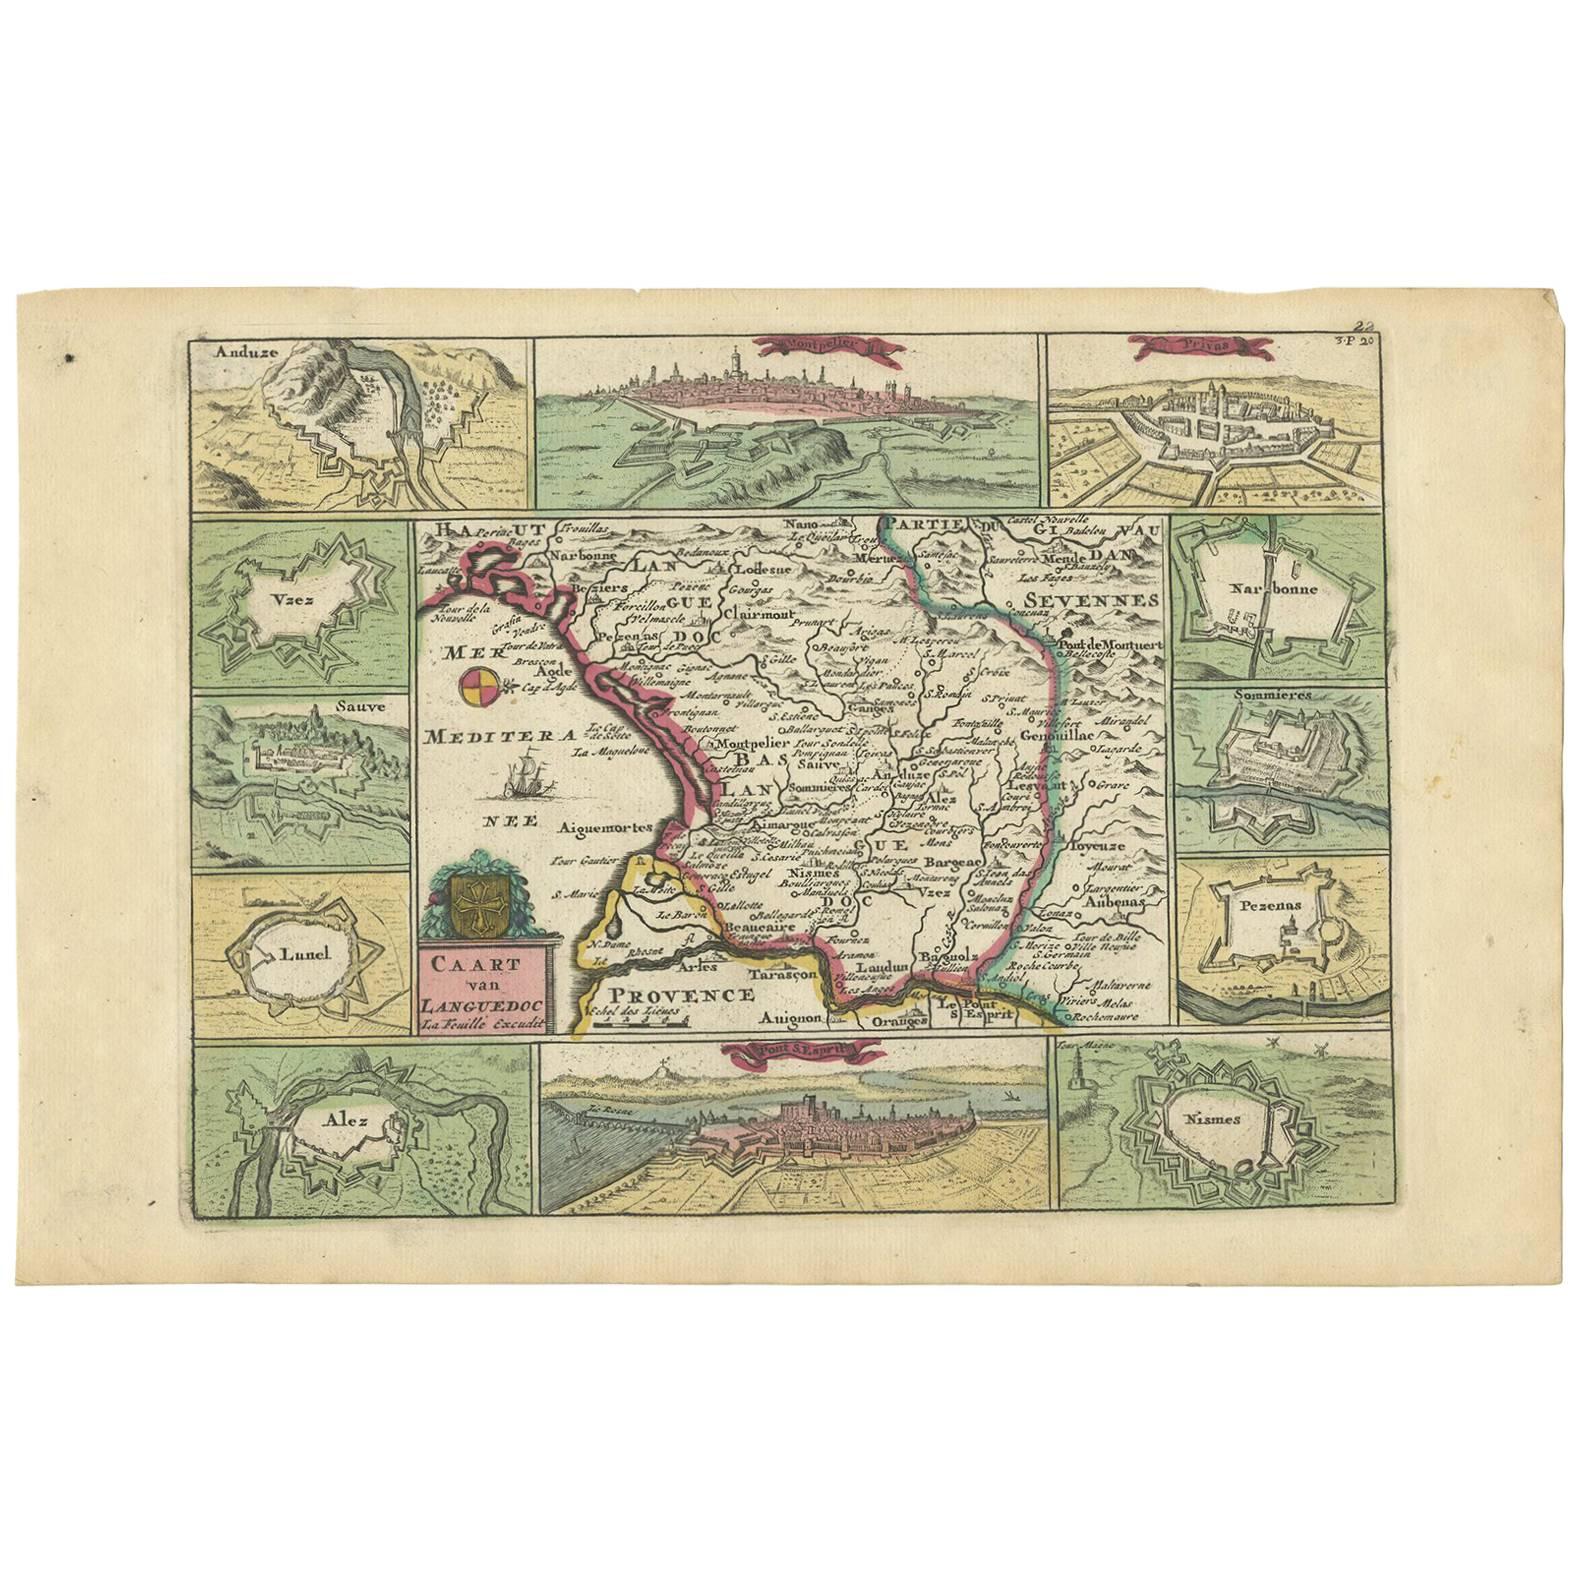 Antique Map of the Languedoc Region 'France' by D. Weege, 1753